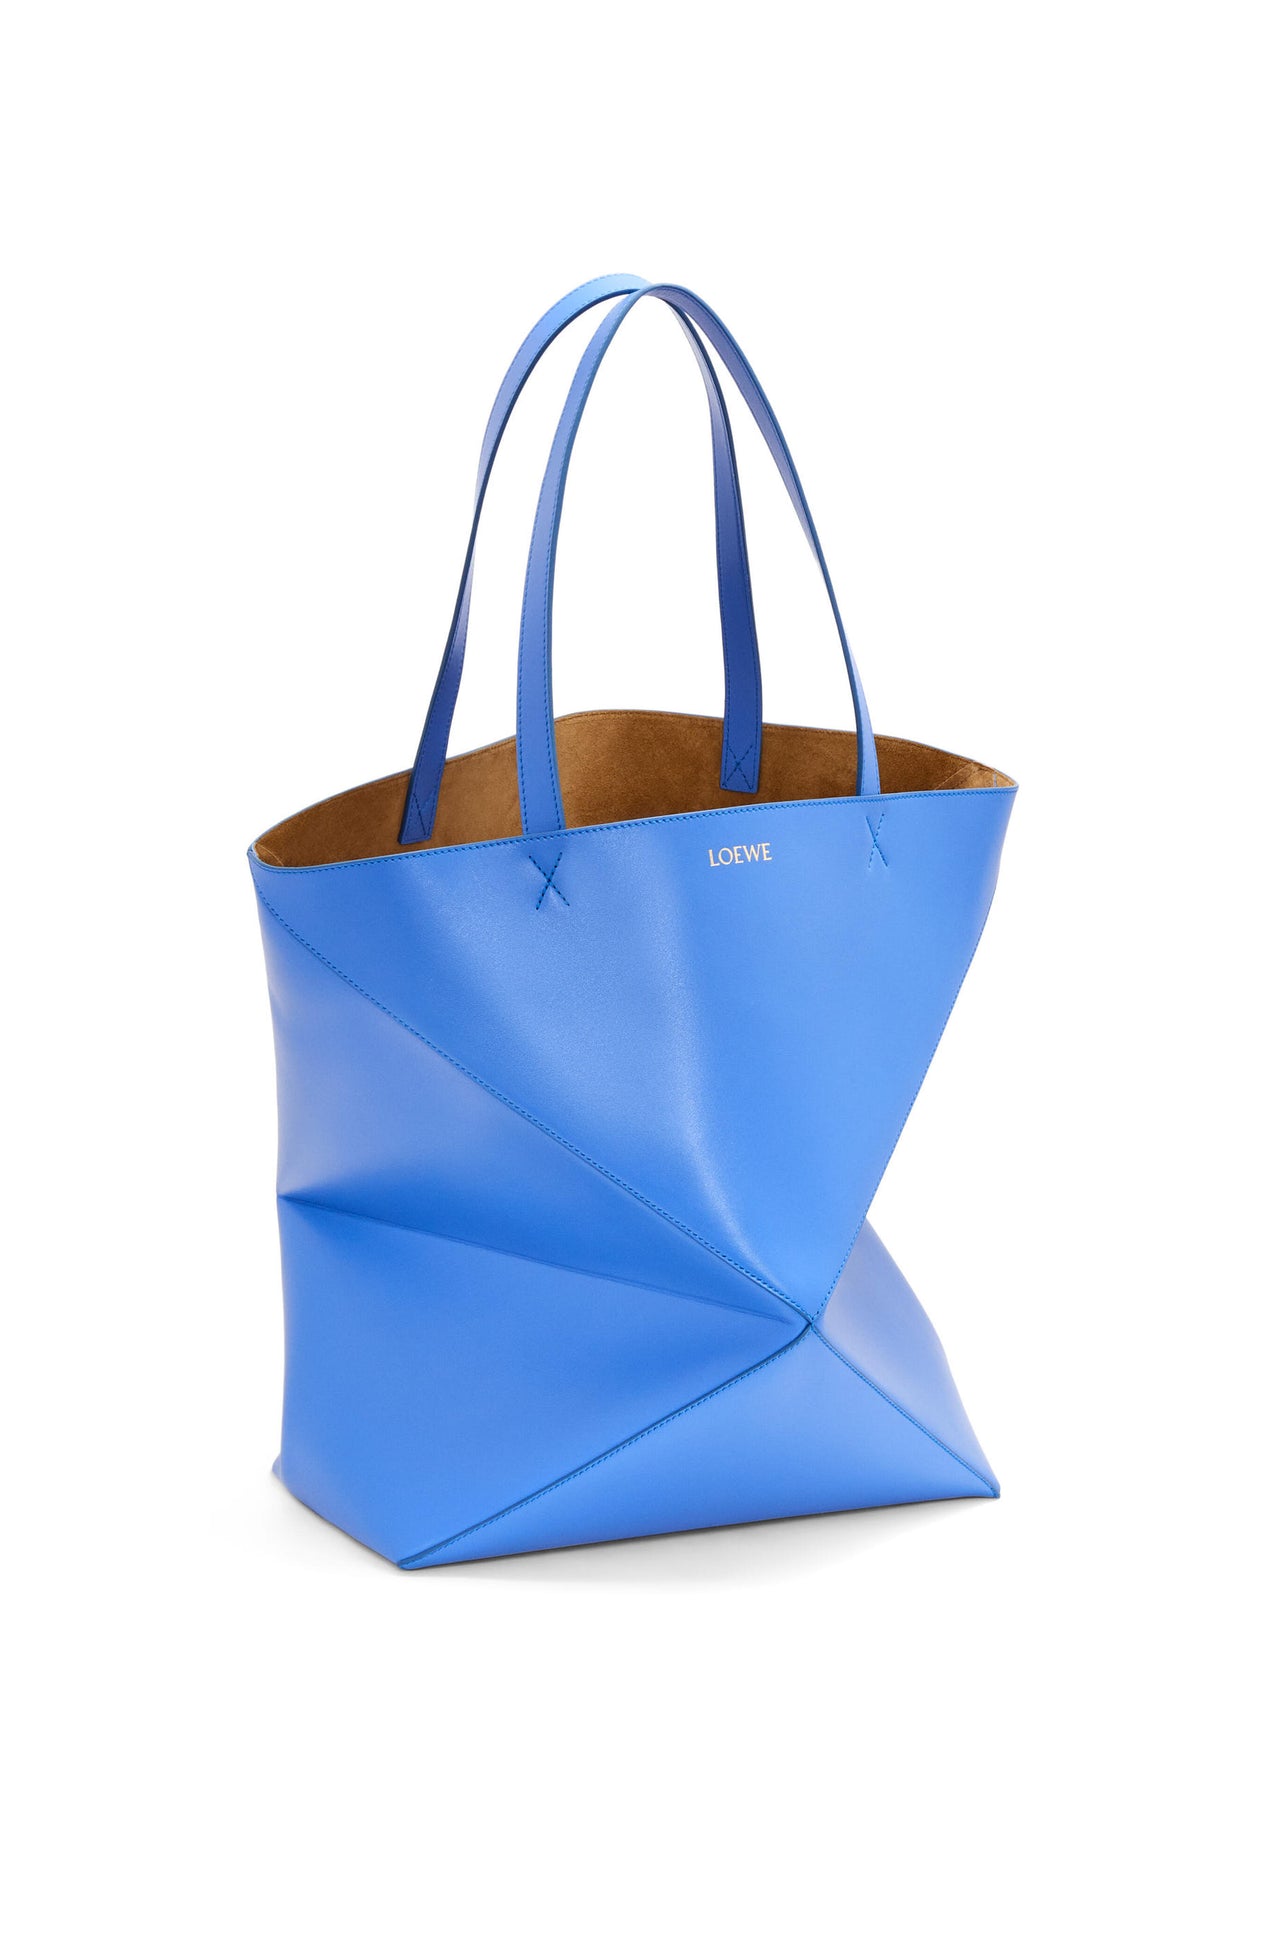 Loewe Large Puzzle Fold Tote in shiny calfskin (Colour: Seaside Blue)